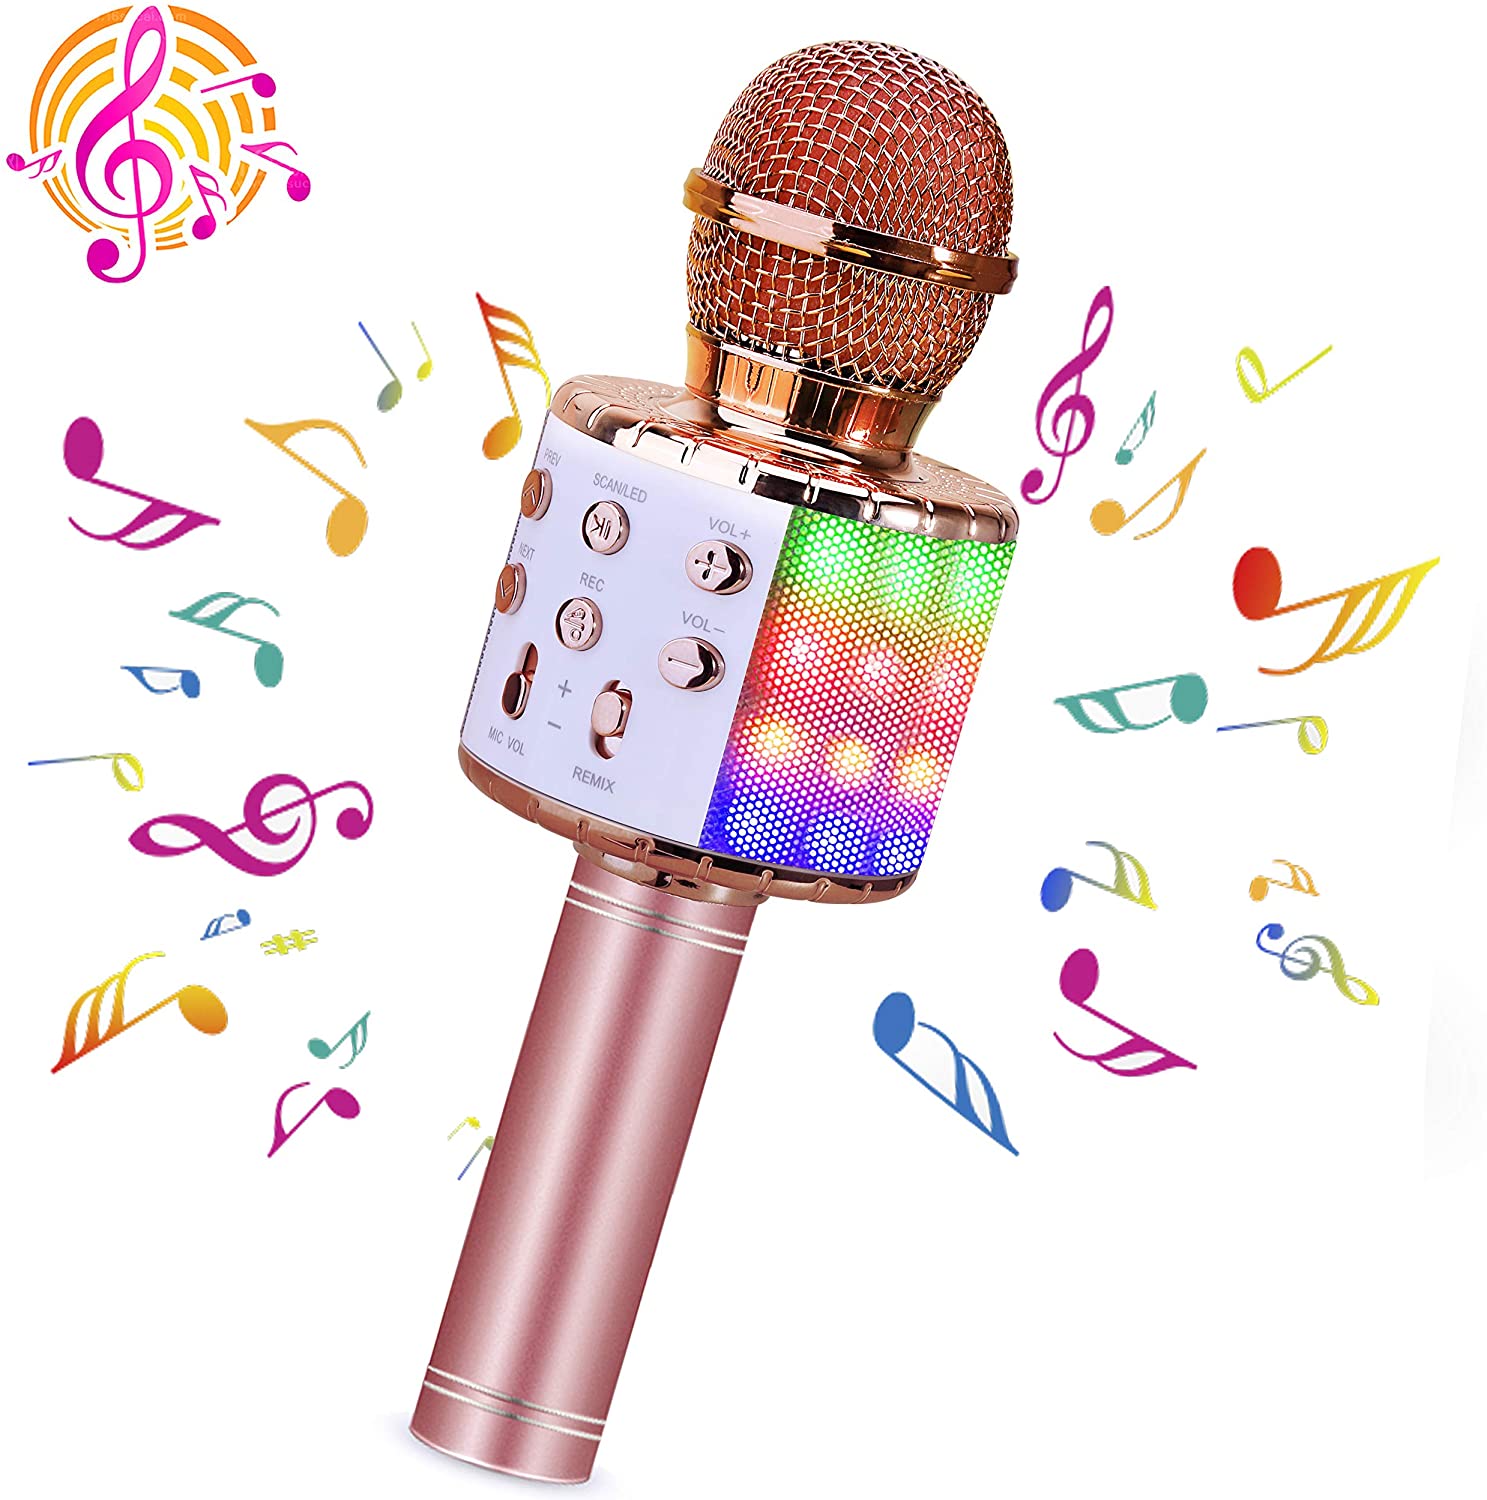 Toys for 3-16 Years Old Girls Gifts,Karaoke Microphone for Kids Age 4-12,Best Fun Christmas Birthday Gifts for 5 6 7 8 9 10 11 Years Teens Girl Boys(